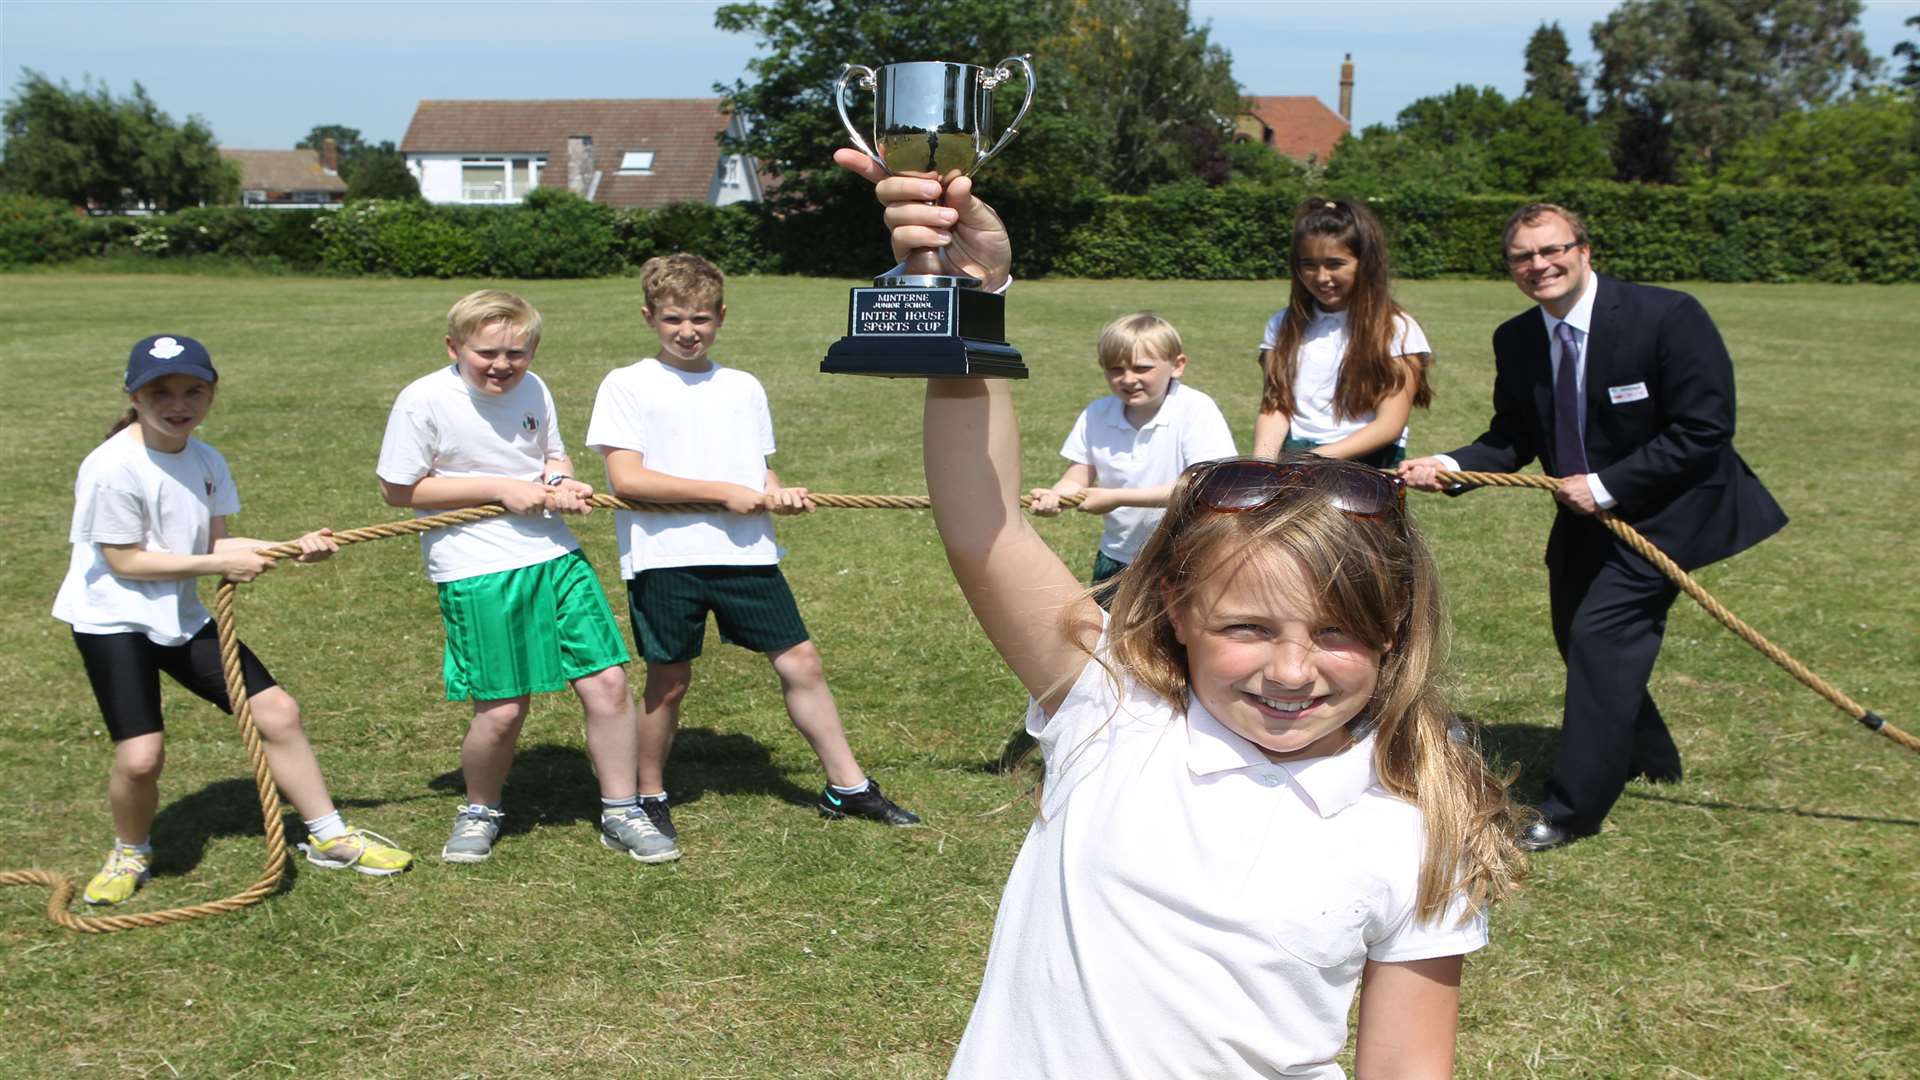 Florence, 11, holds up a trophy that her Year 6 team won in a tug-of-war competition